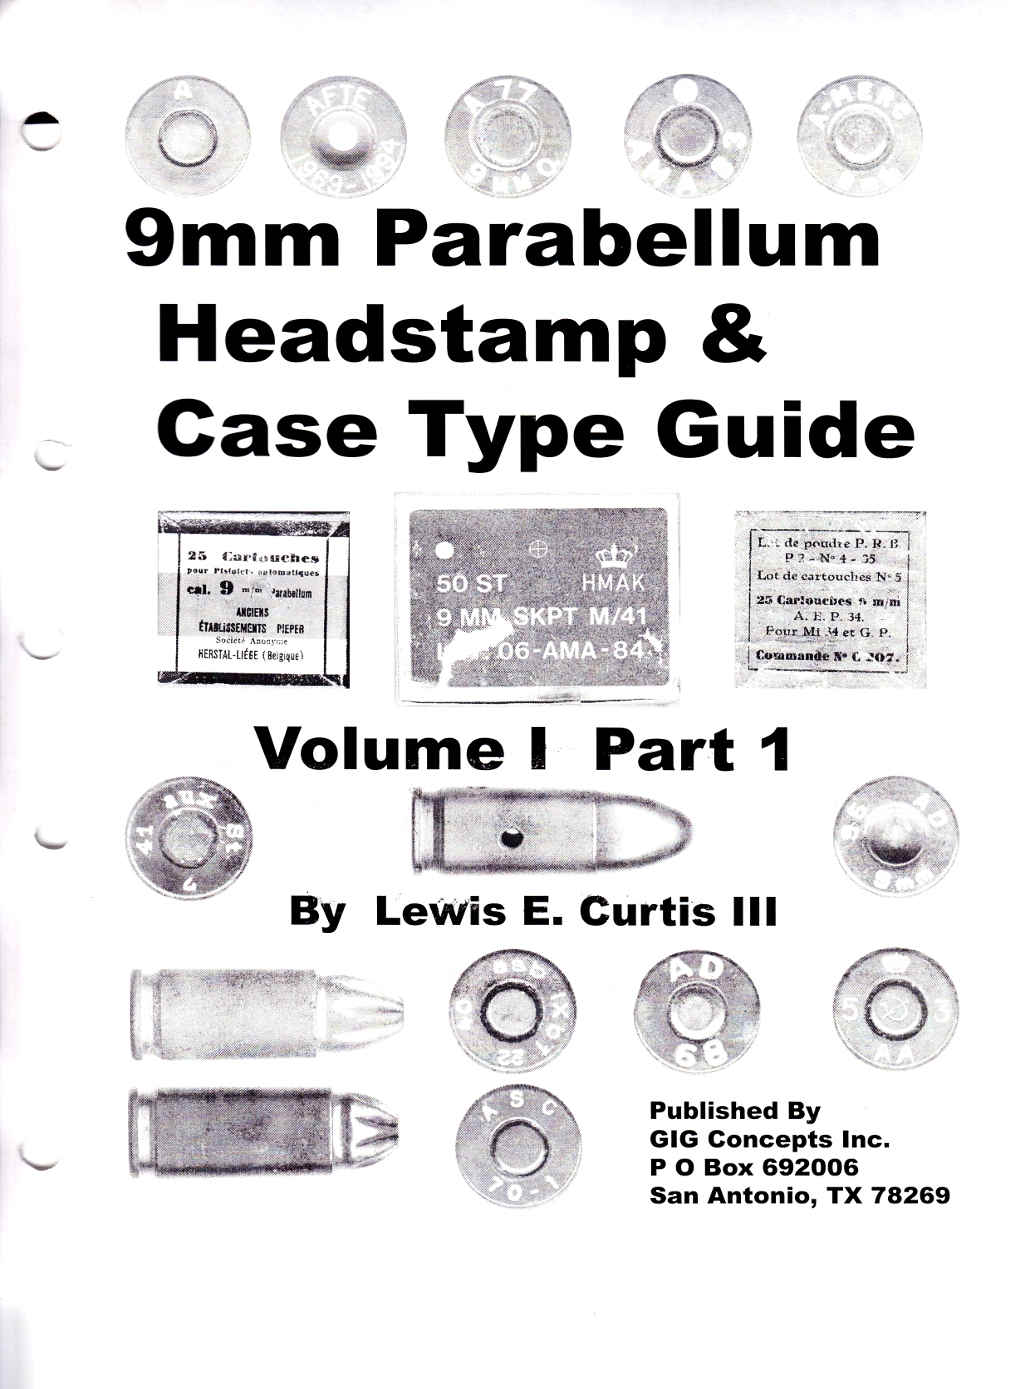 9 mm Para Headstamp & case type Guide Vol.1 Part 1